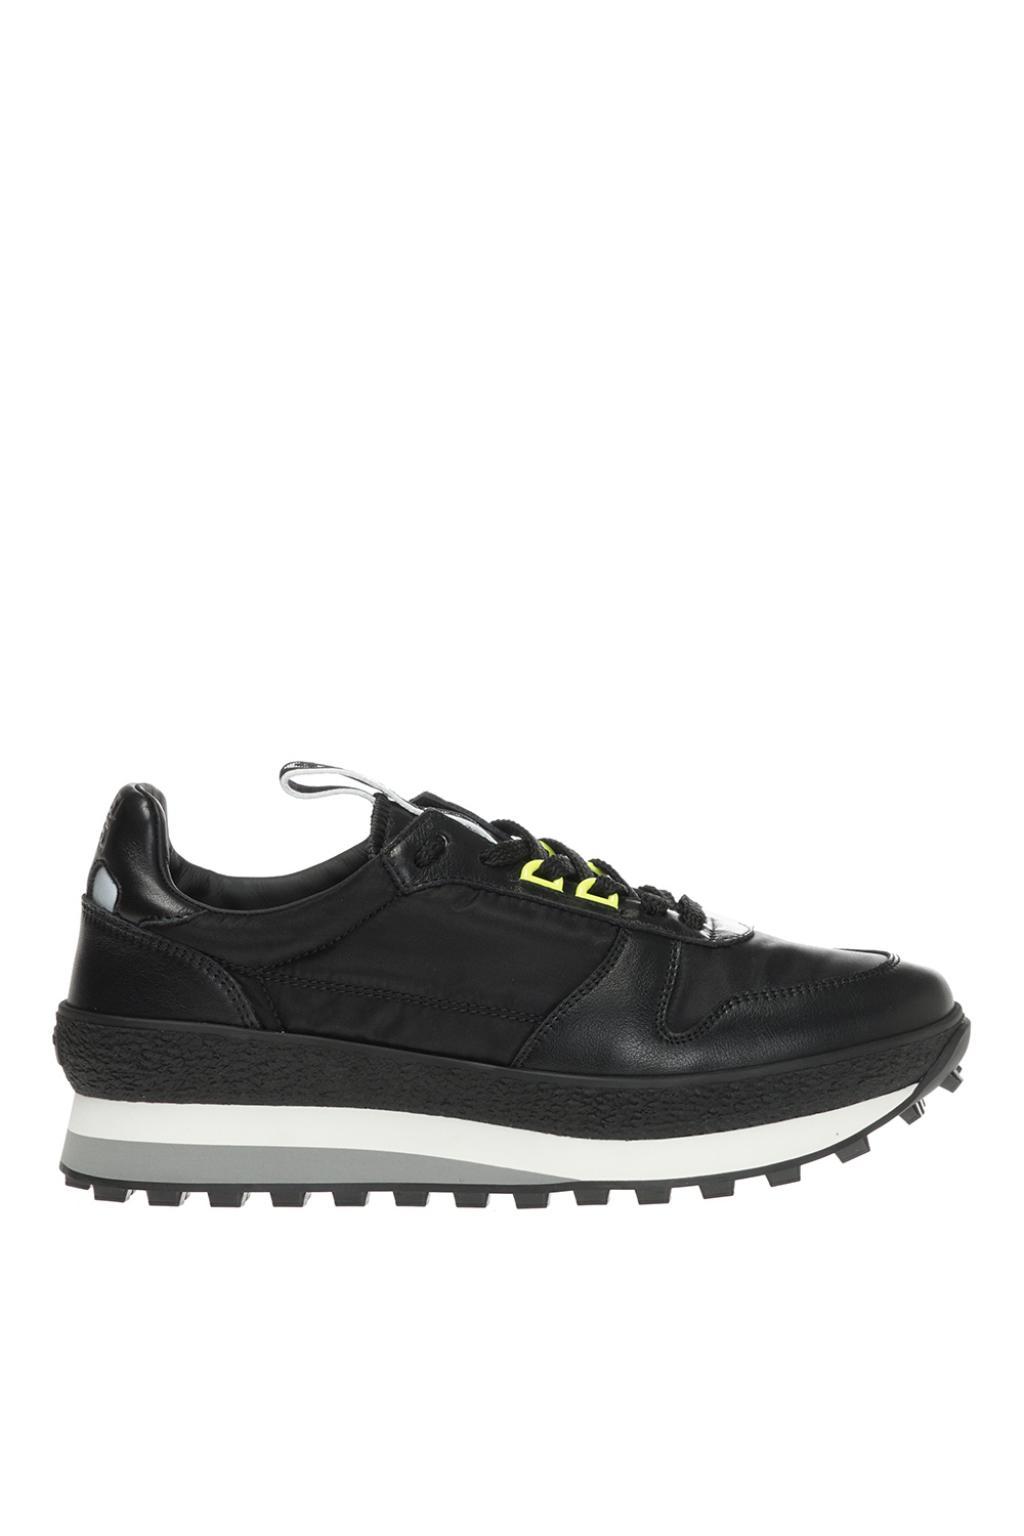 givenchy t3 runner